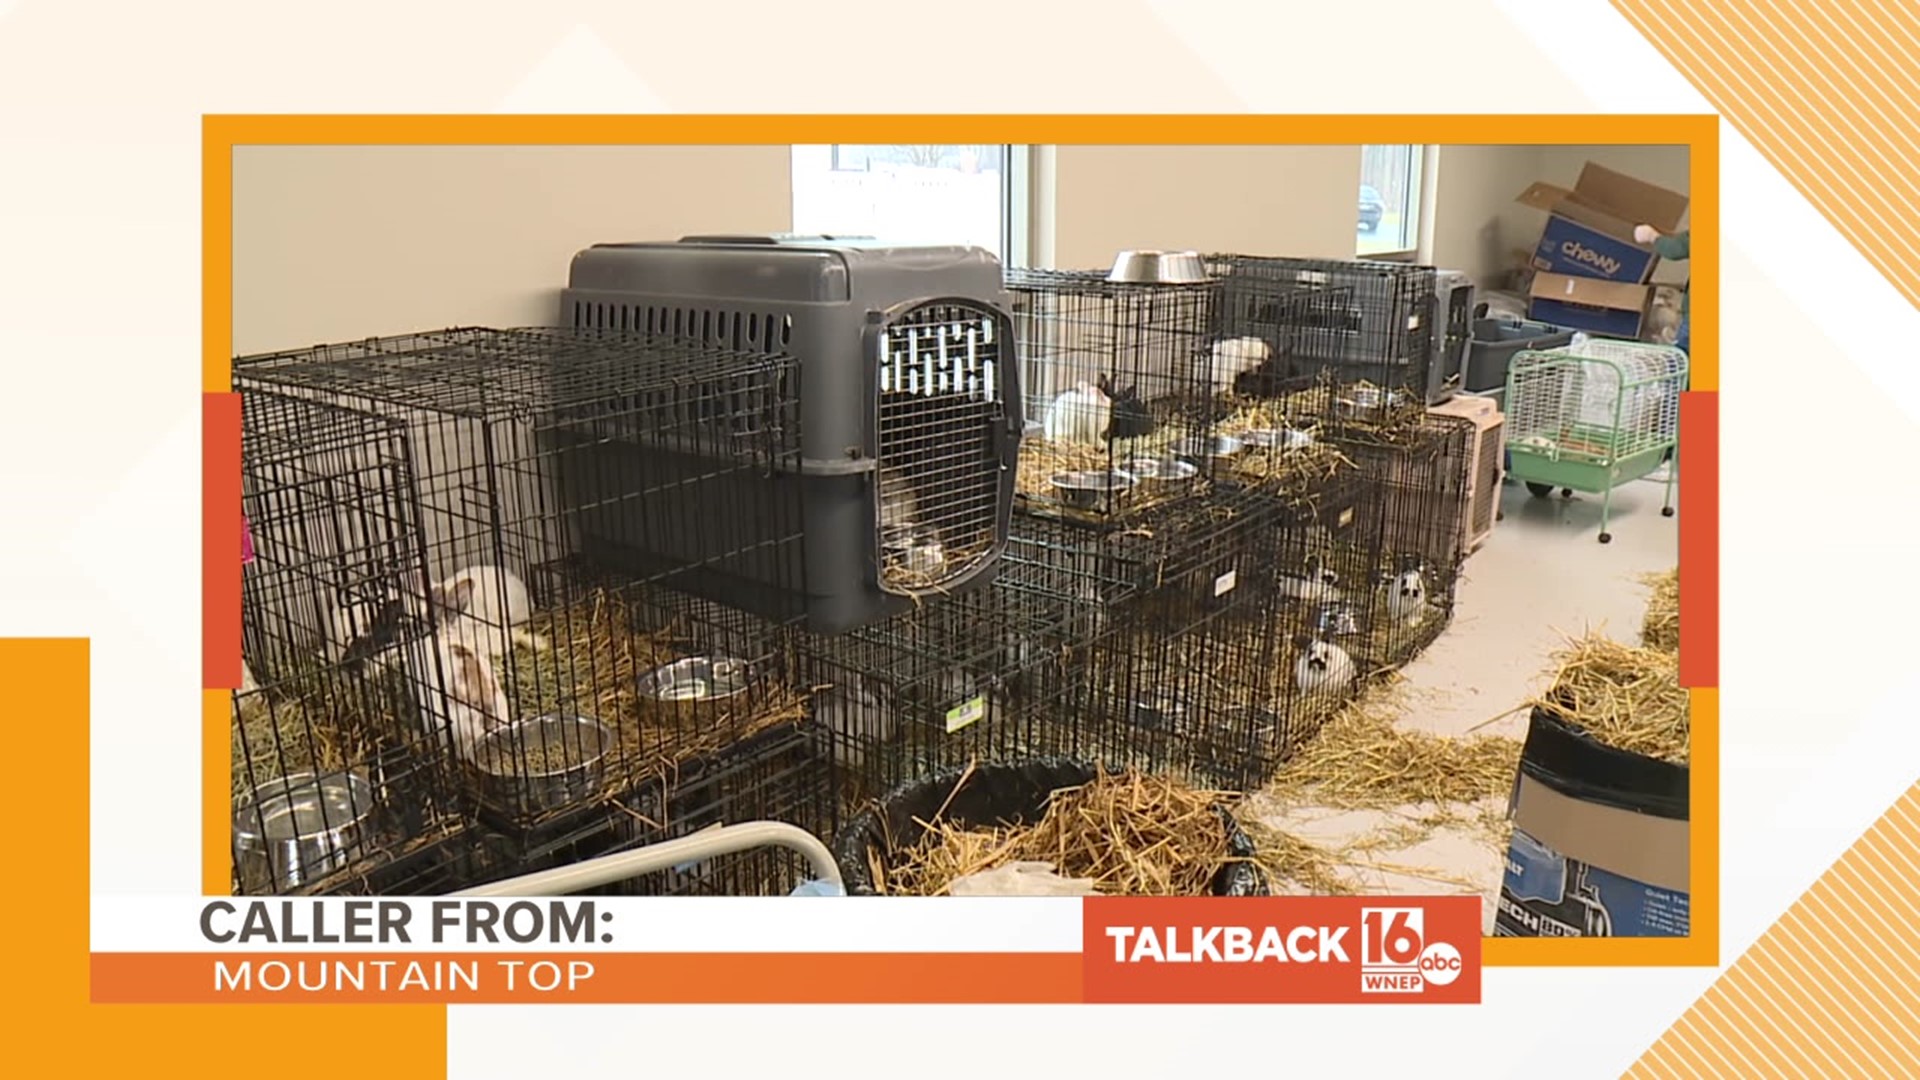 Callers share their thoughts on the rescued rabbits of Moscow.